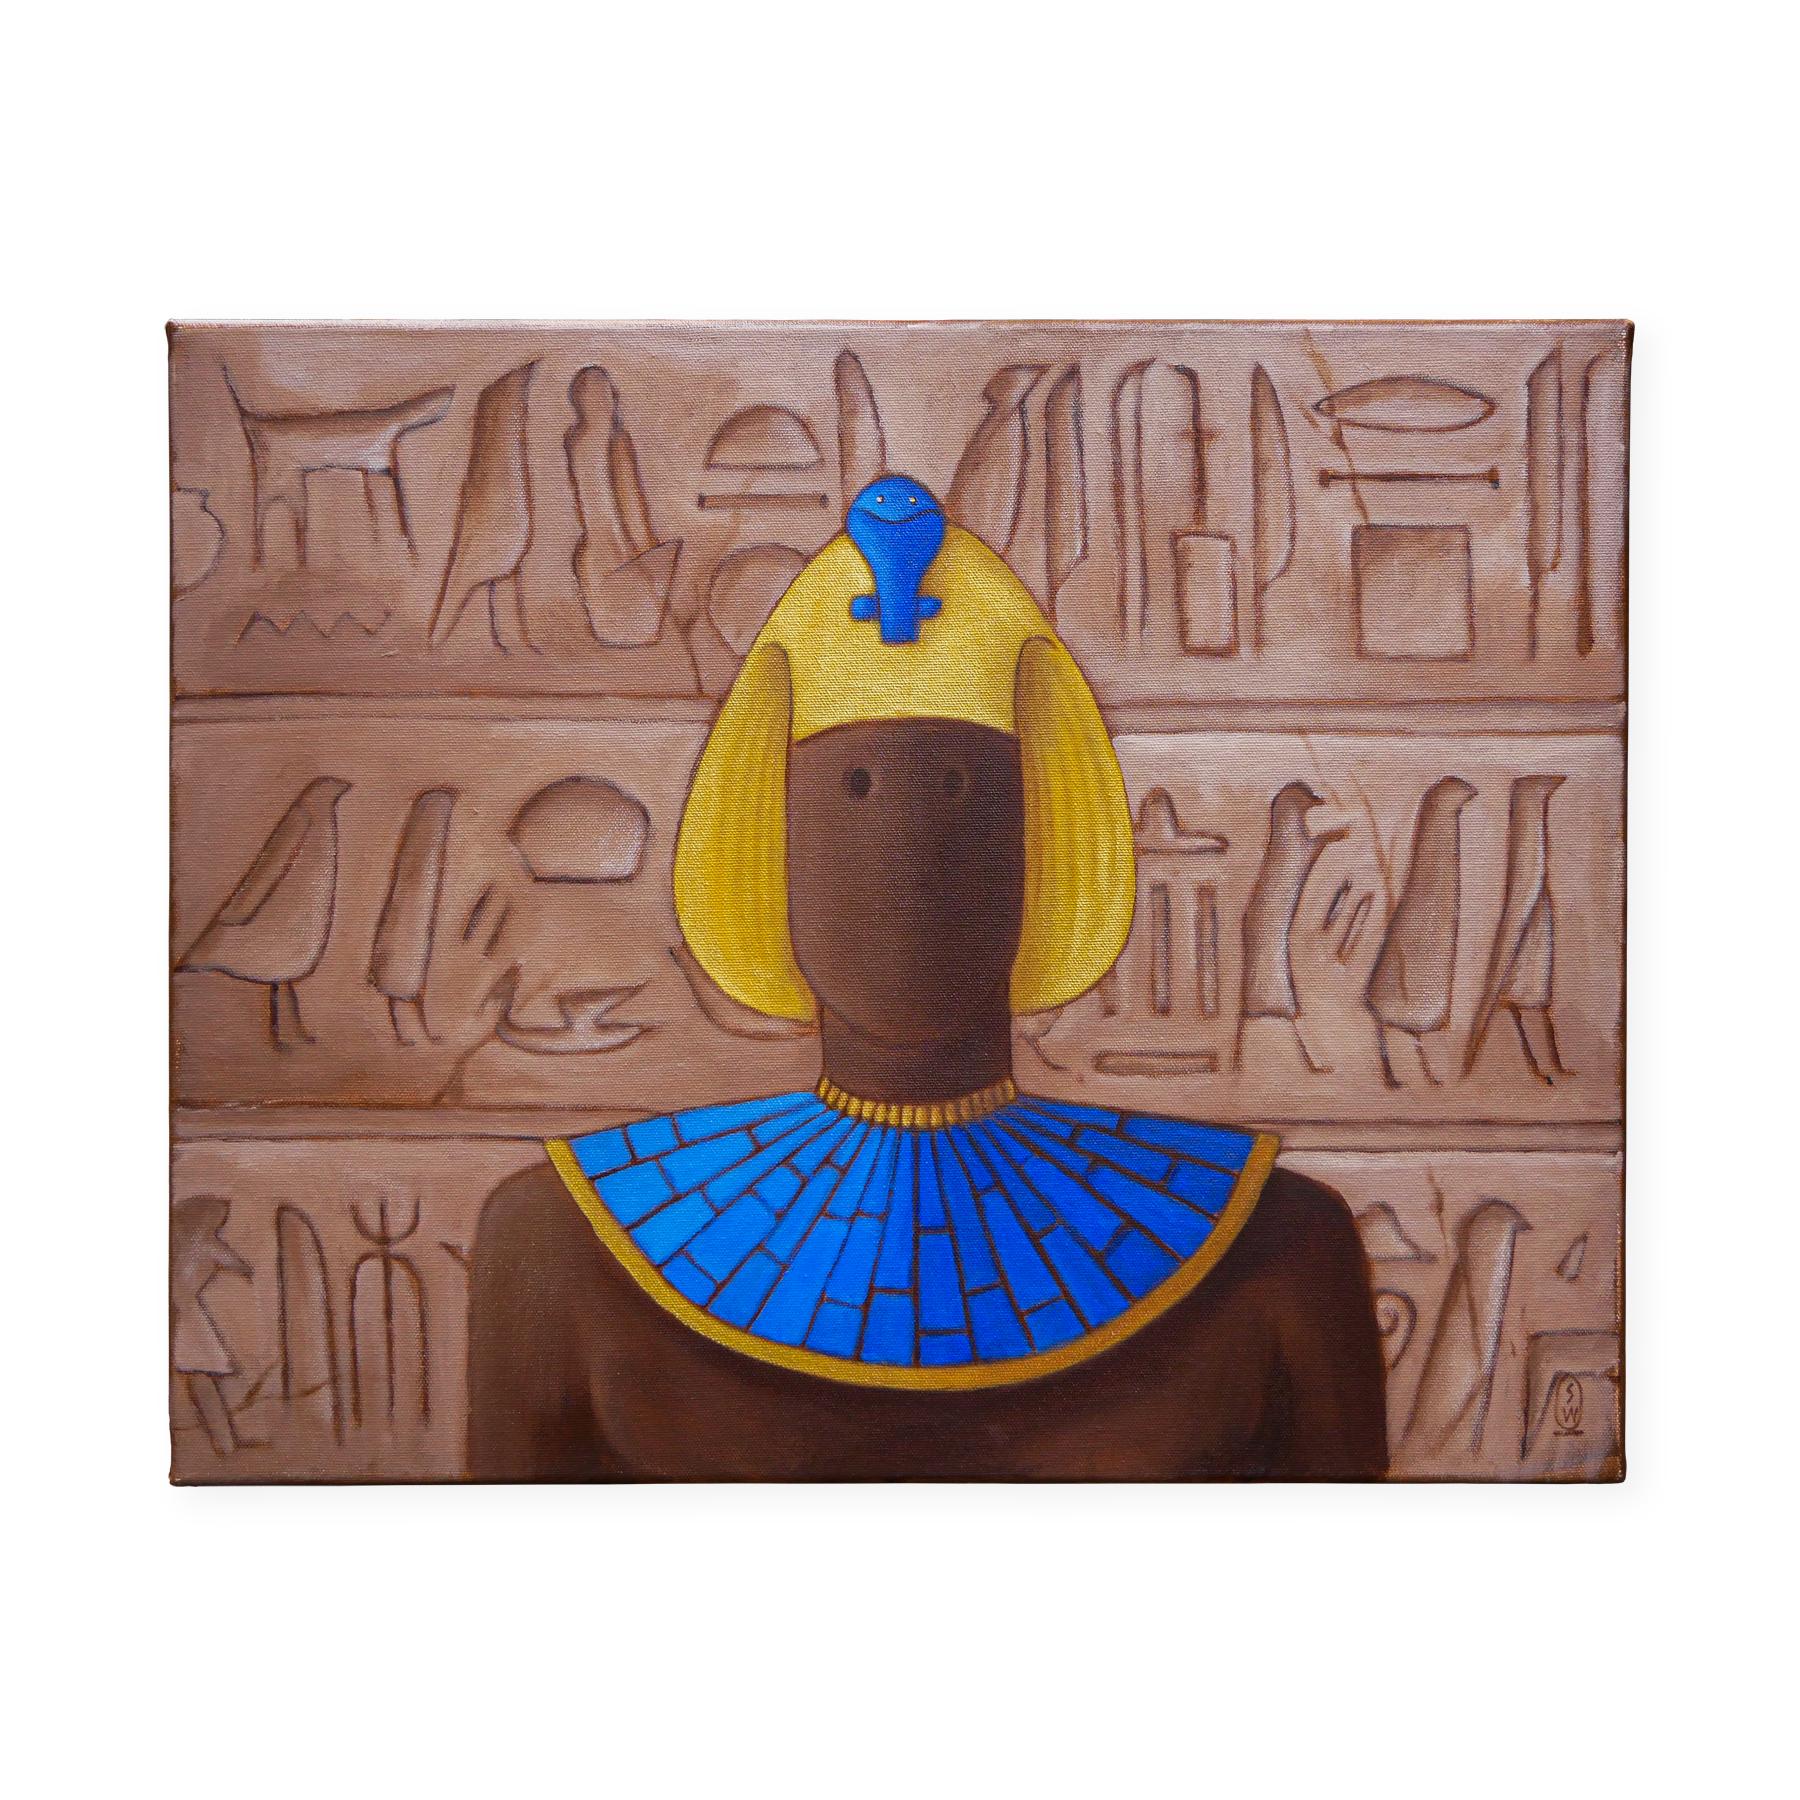 Brown and blue abstract figurative painting by Houston, TX artist Scott Woodard. The painting depicts a pharaoh wearing a blue headdress against a wall of ancient hieroglyphs. Signed by the artist at the bottom right. Titled and dated at the back.